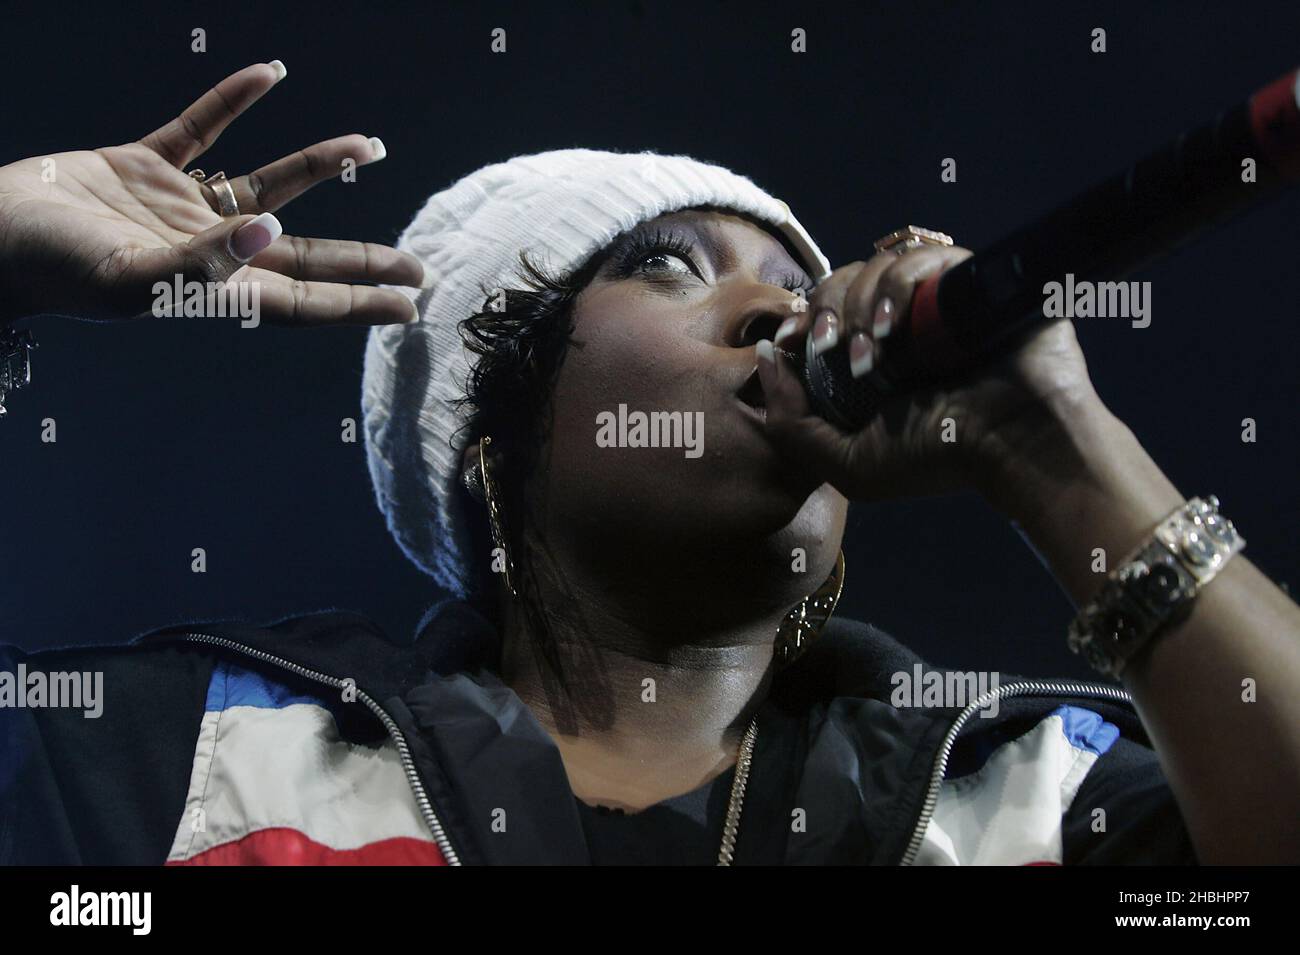 Hip-hop singer Missy Elliott performs one-off London show promoting her current album 'The Cookbook' at the Carling Apollo Hammersmith in London. Her side kick is Fatman Scoop. Stock Photo